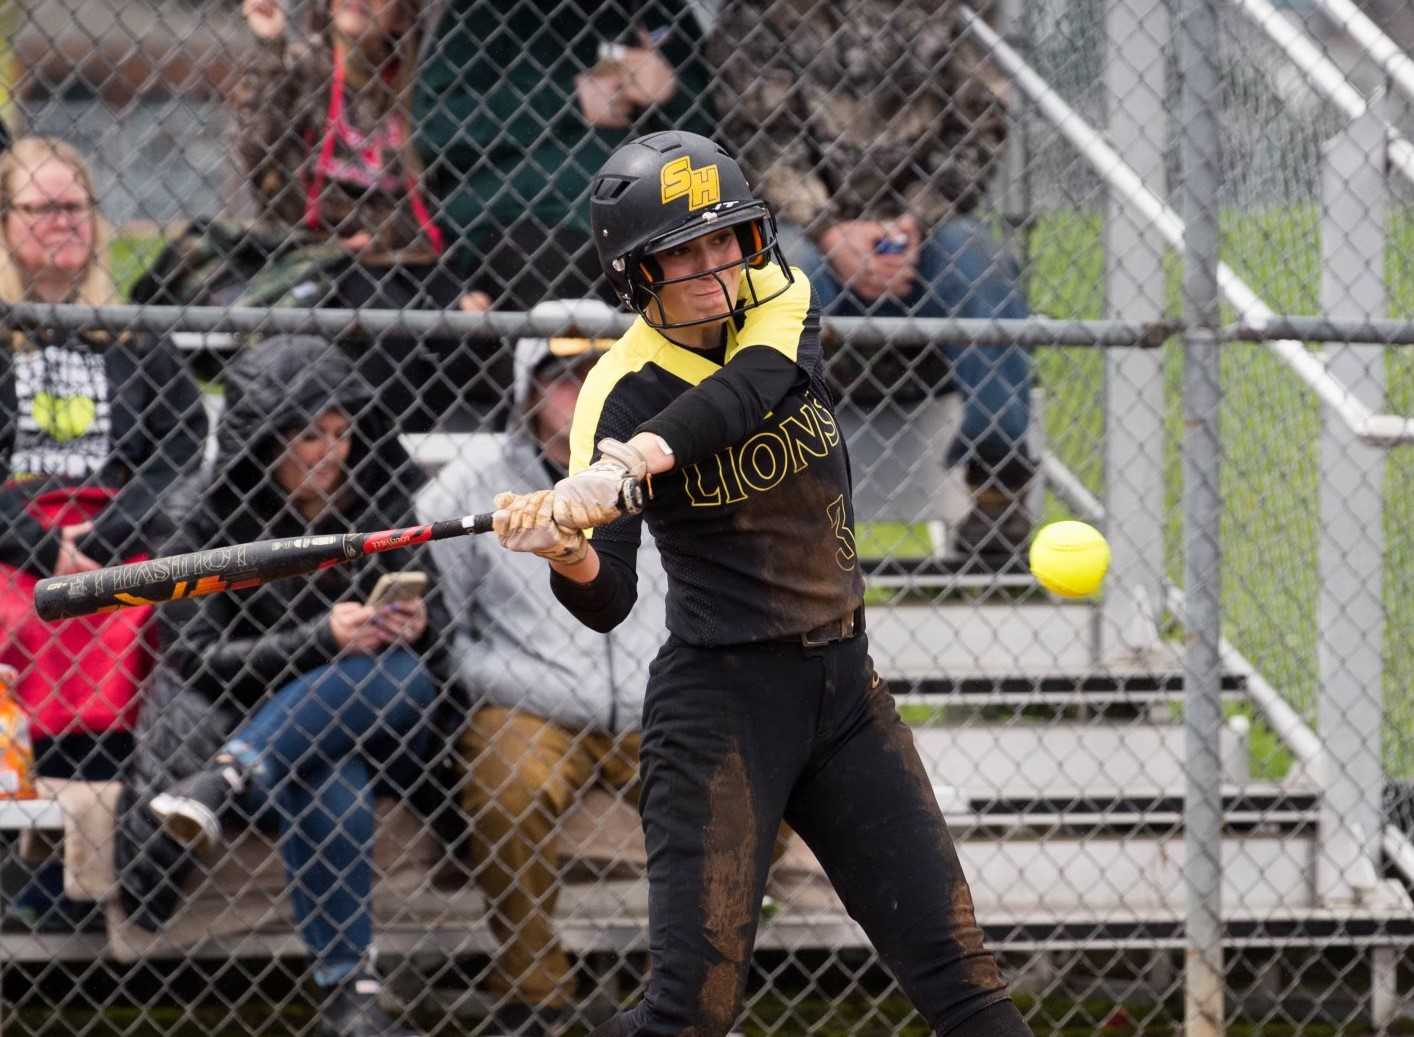 St. Helens senior Ava Eib is batting .538 with 18 RBIs and has struck out 61 batters in 33 innings. (Photo by Jeremy Dueck)